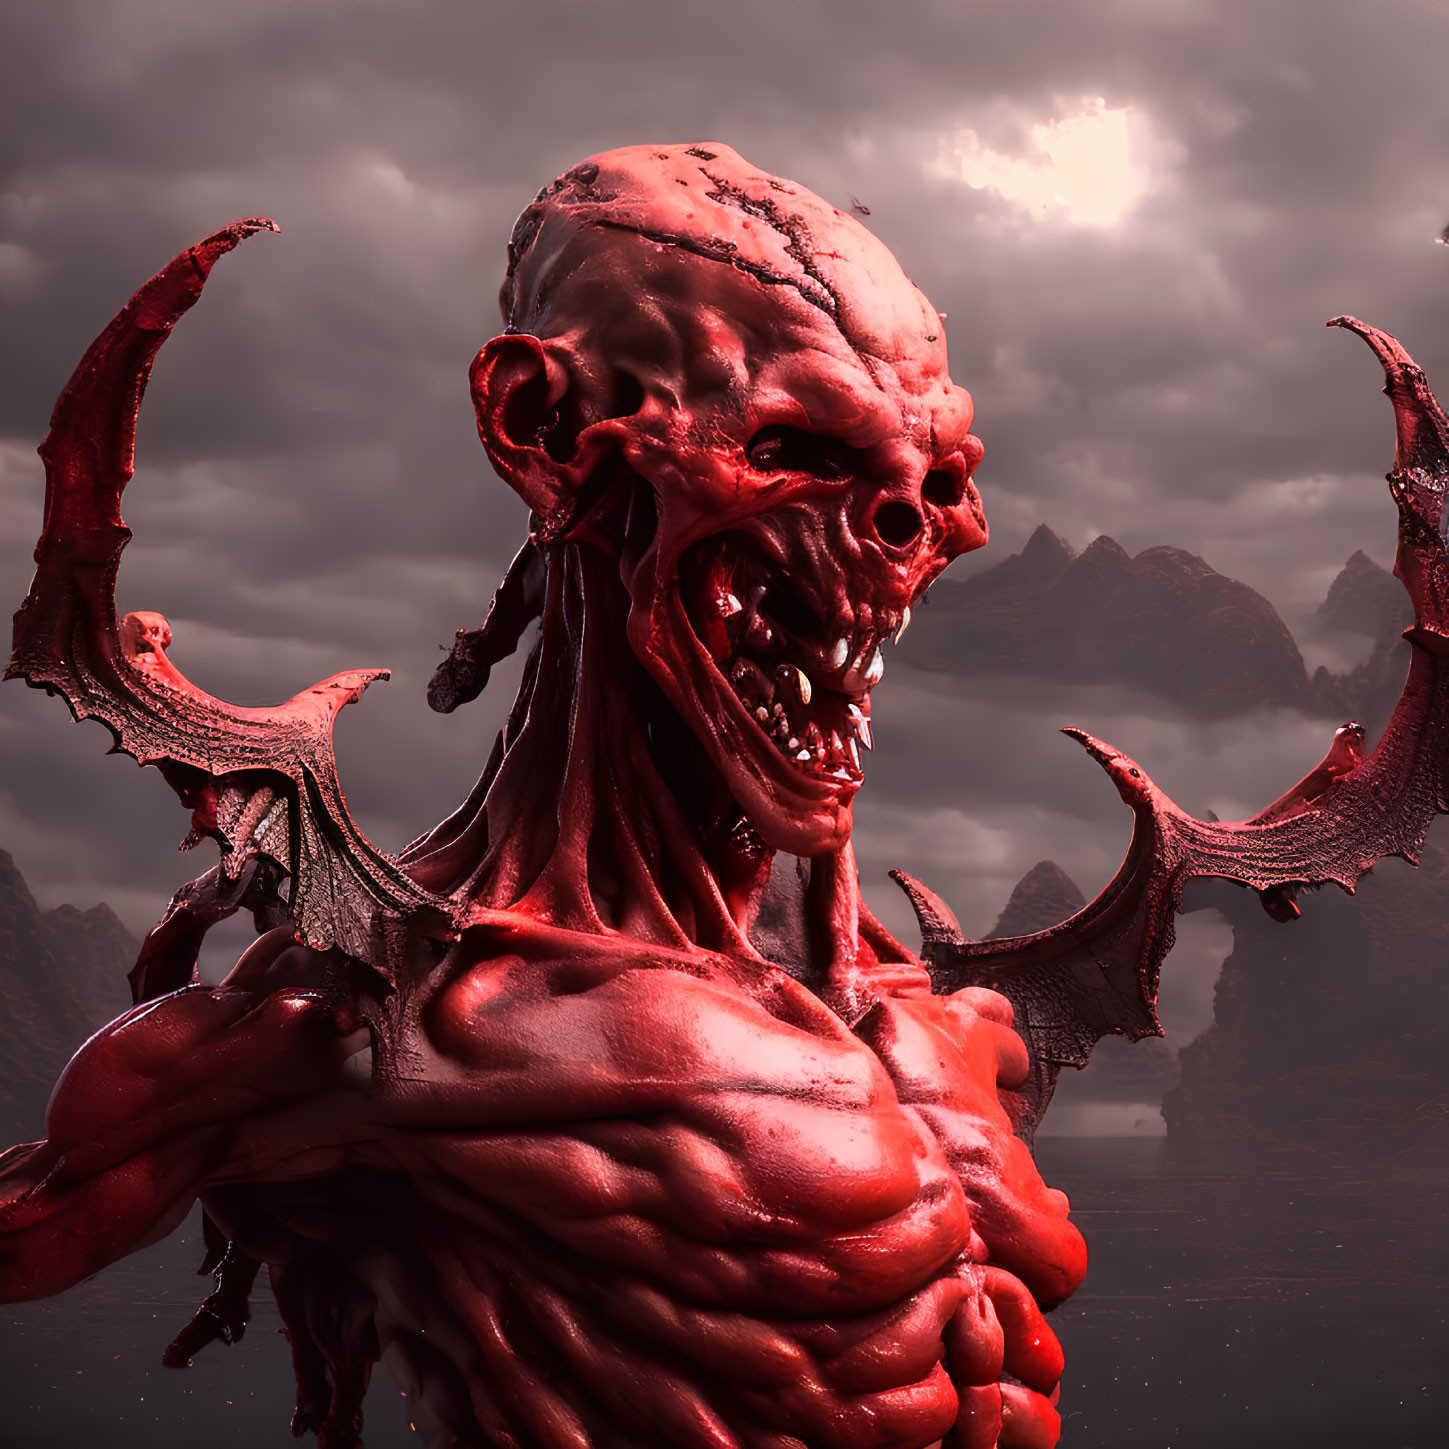 Sinister red-skinned creature with fangs, horns, and wings in mountainous setting